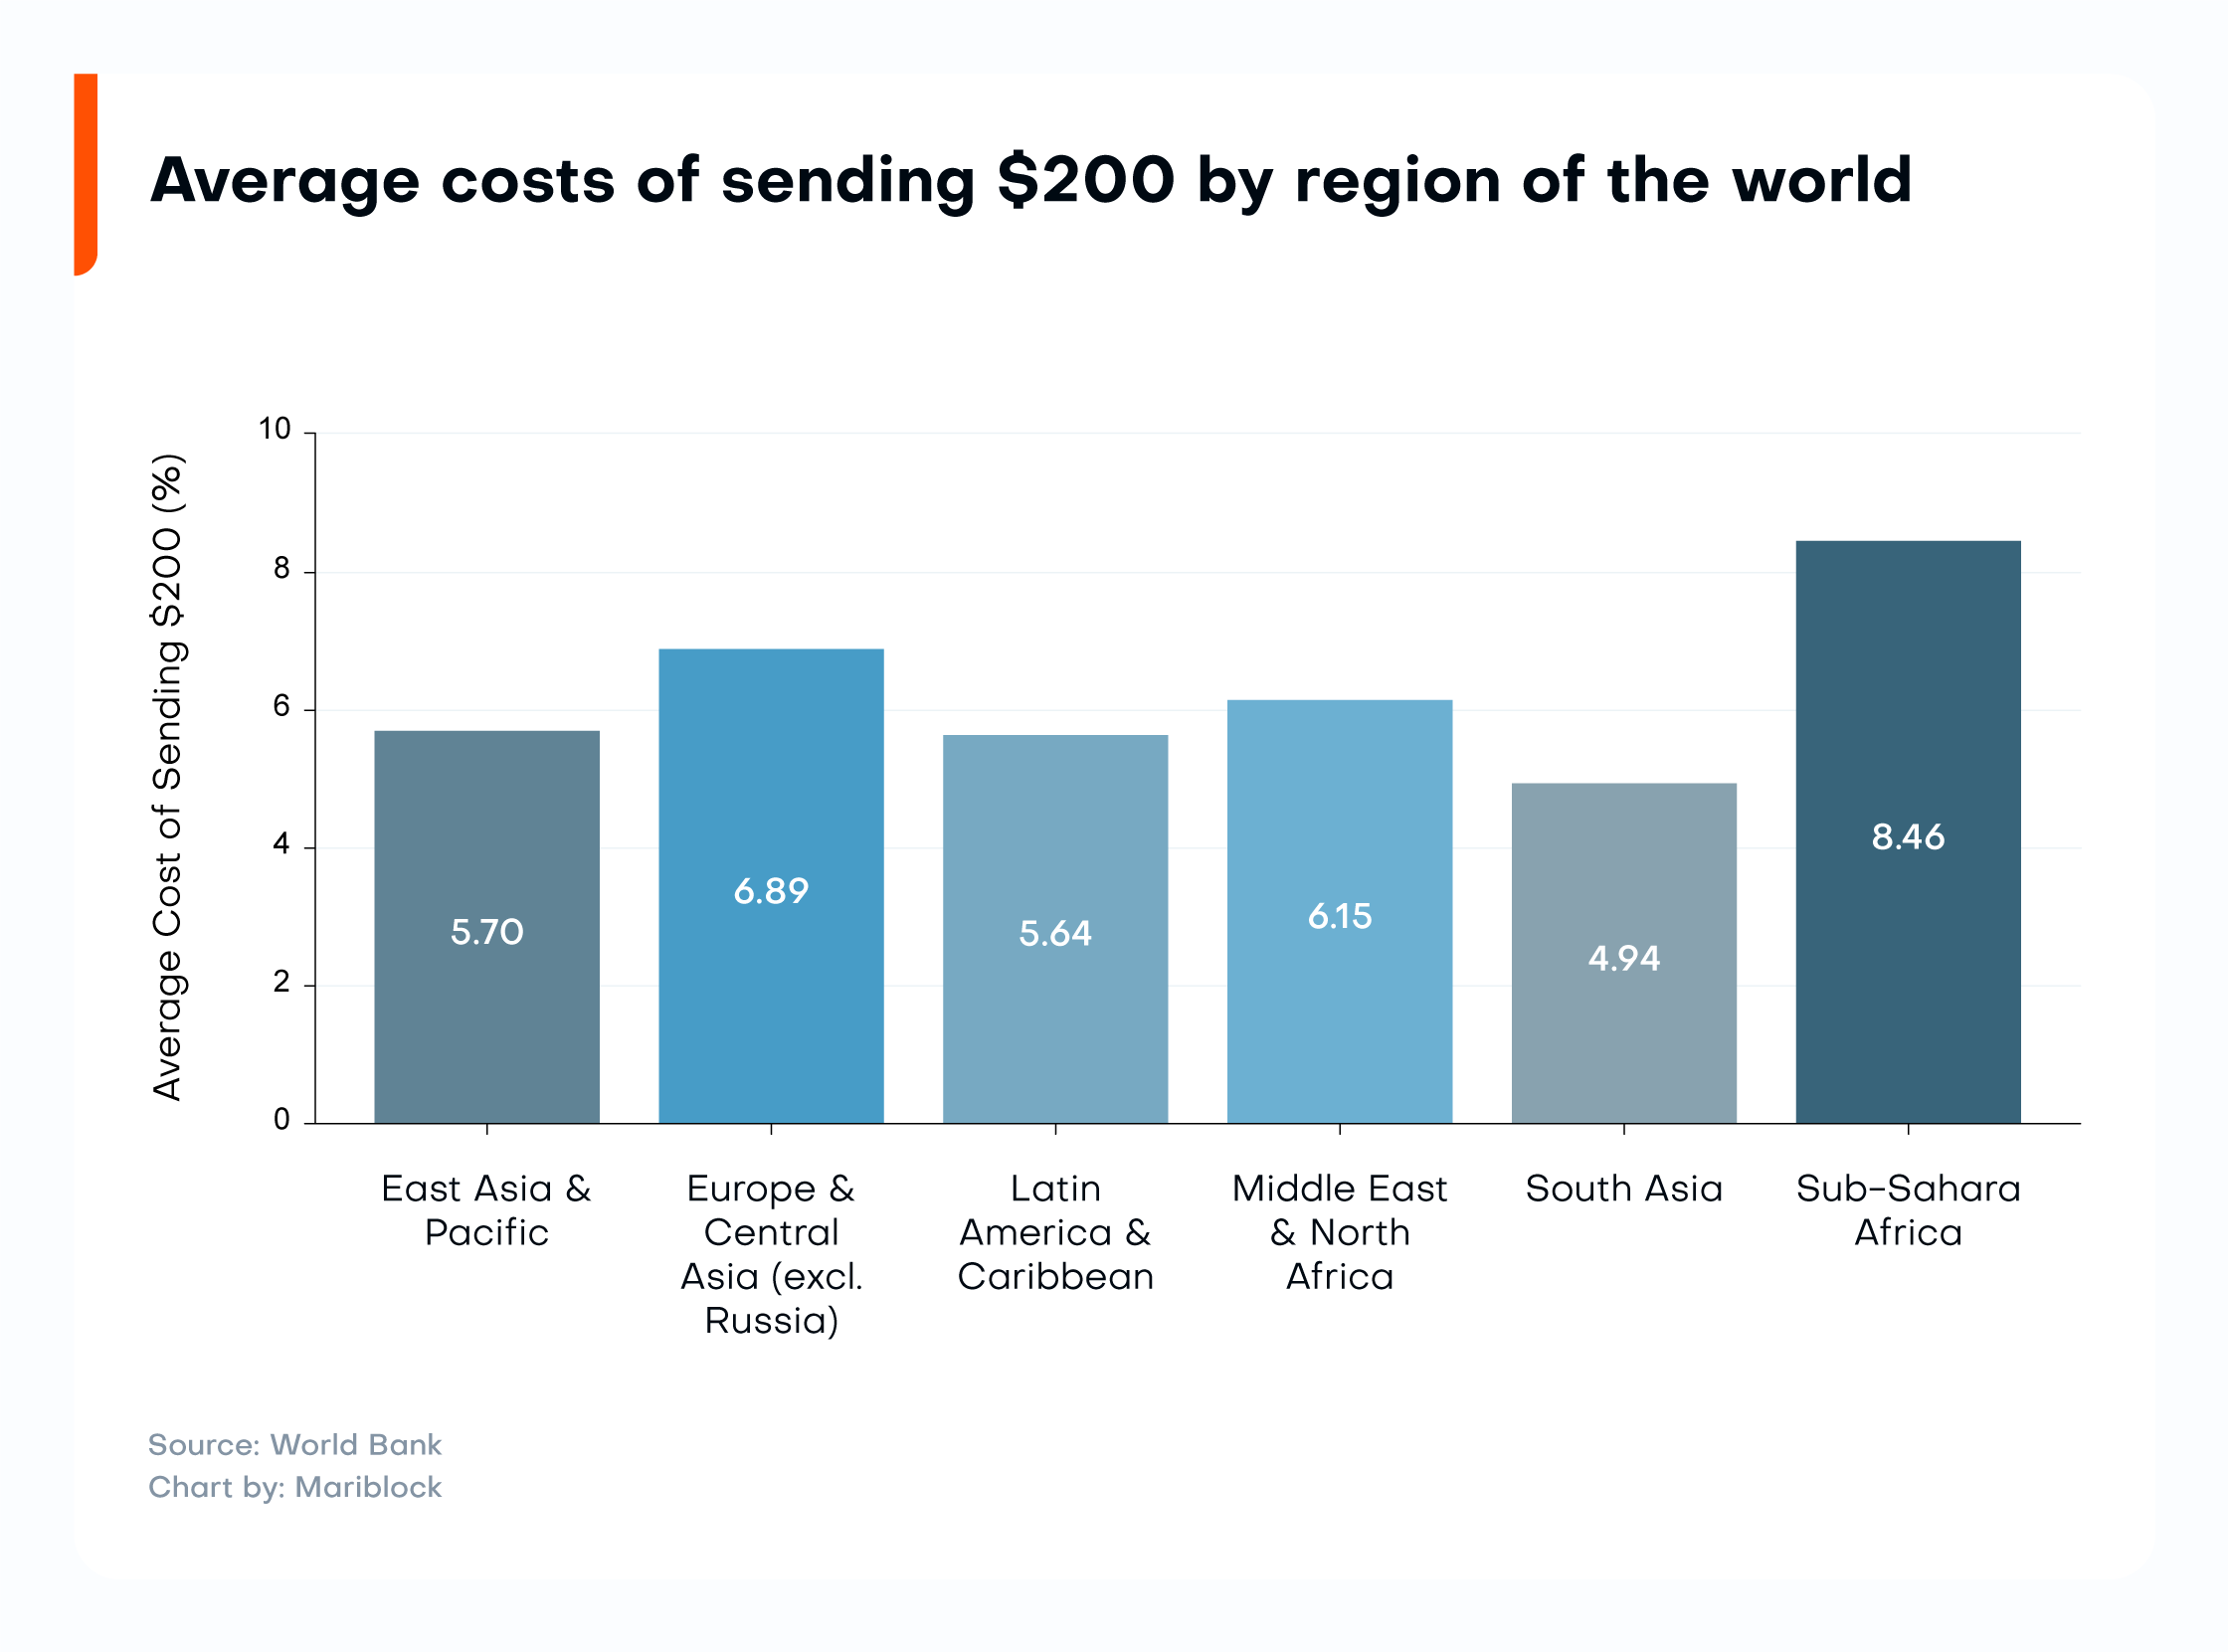 Average costs by region of the world